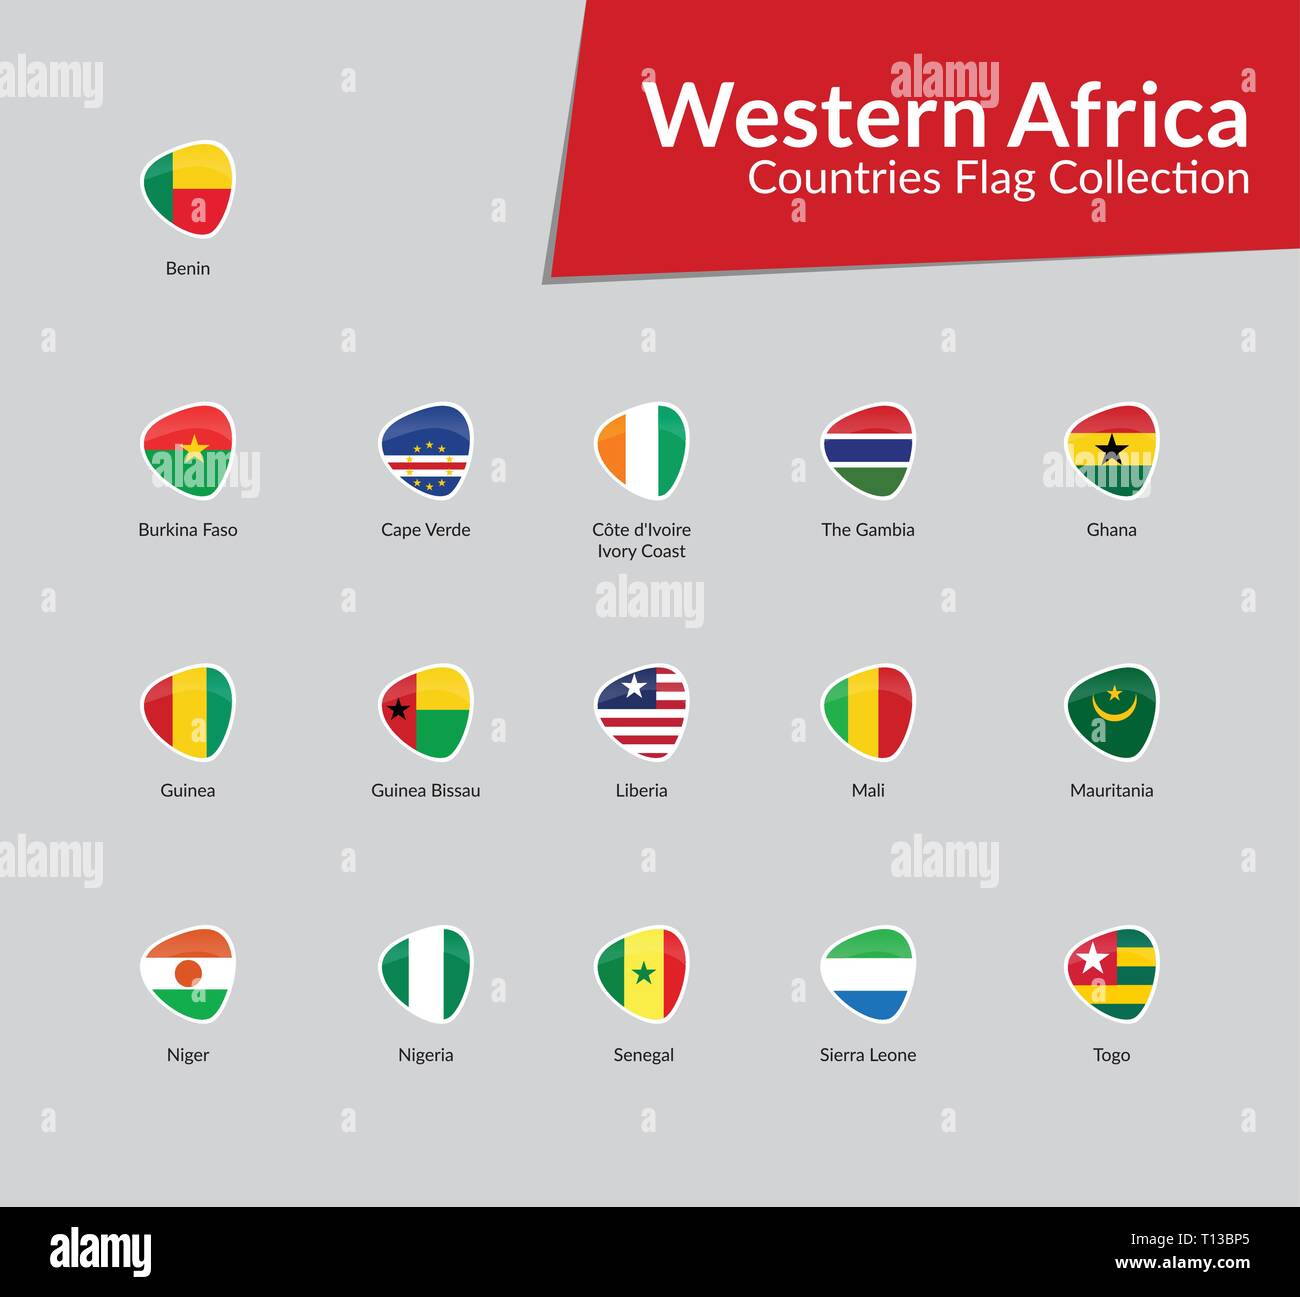 Western Africa Continent Countries Flags vector icon collection Stock Vector